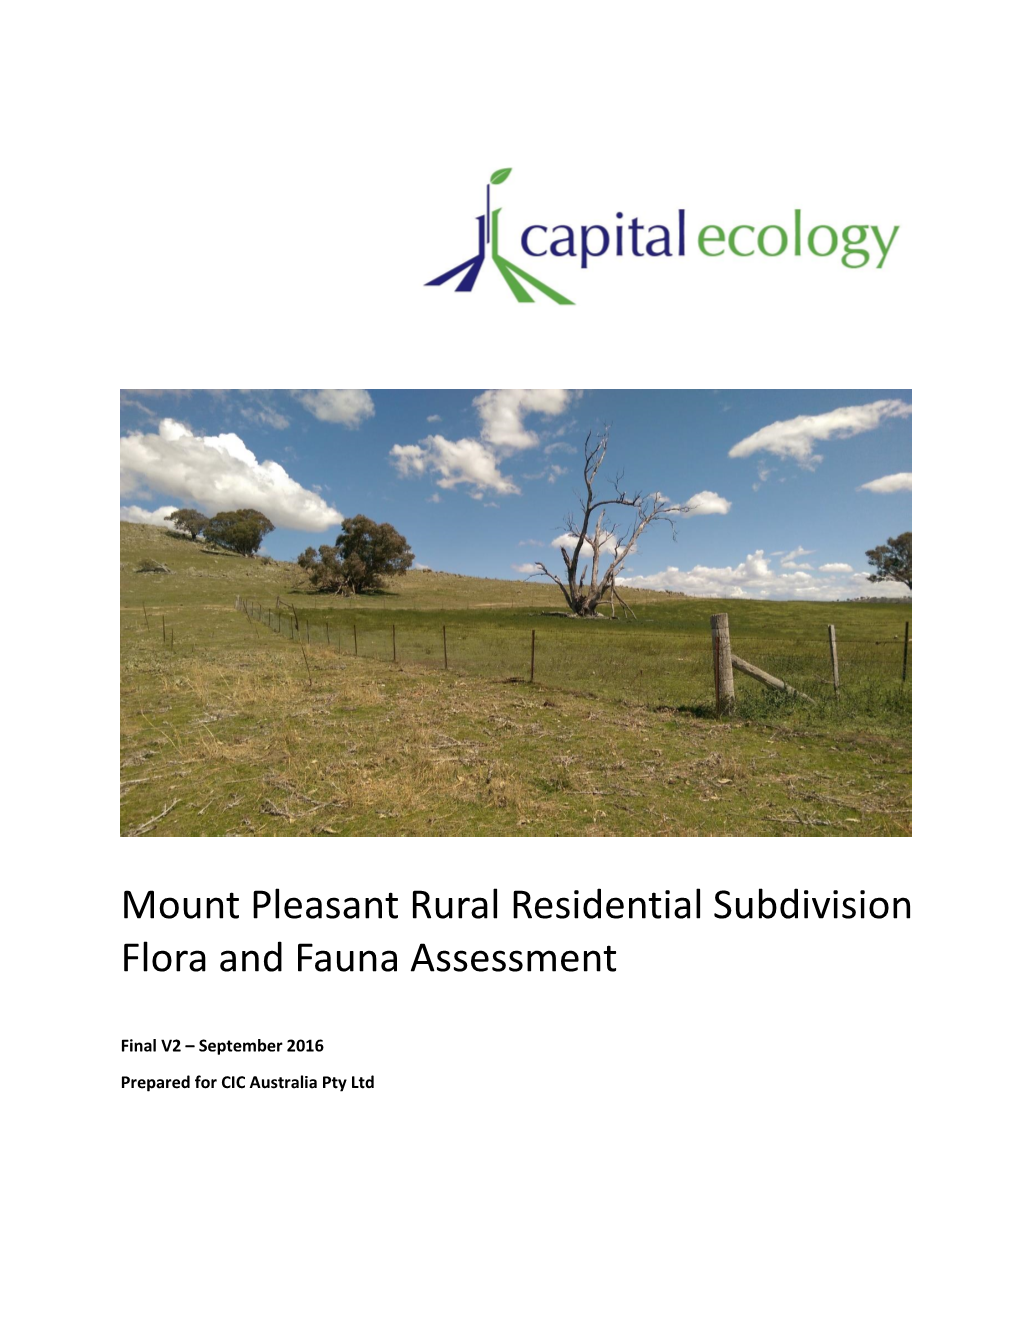 Mount Pleasant Rural Residential Subdivision Flora and Fauna Assessment